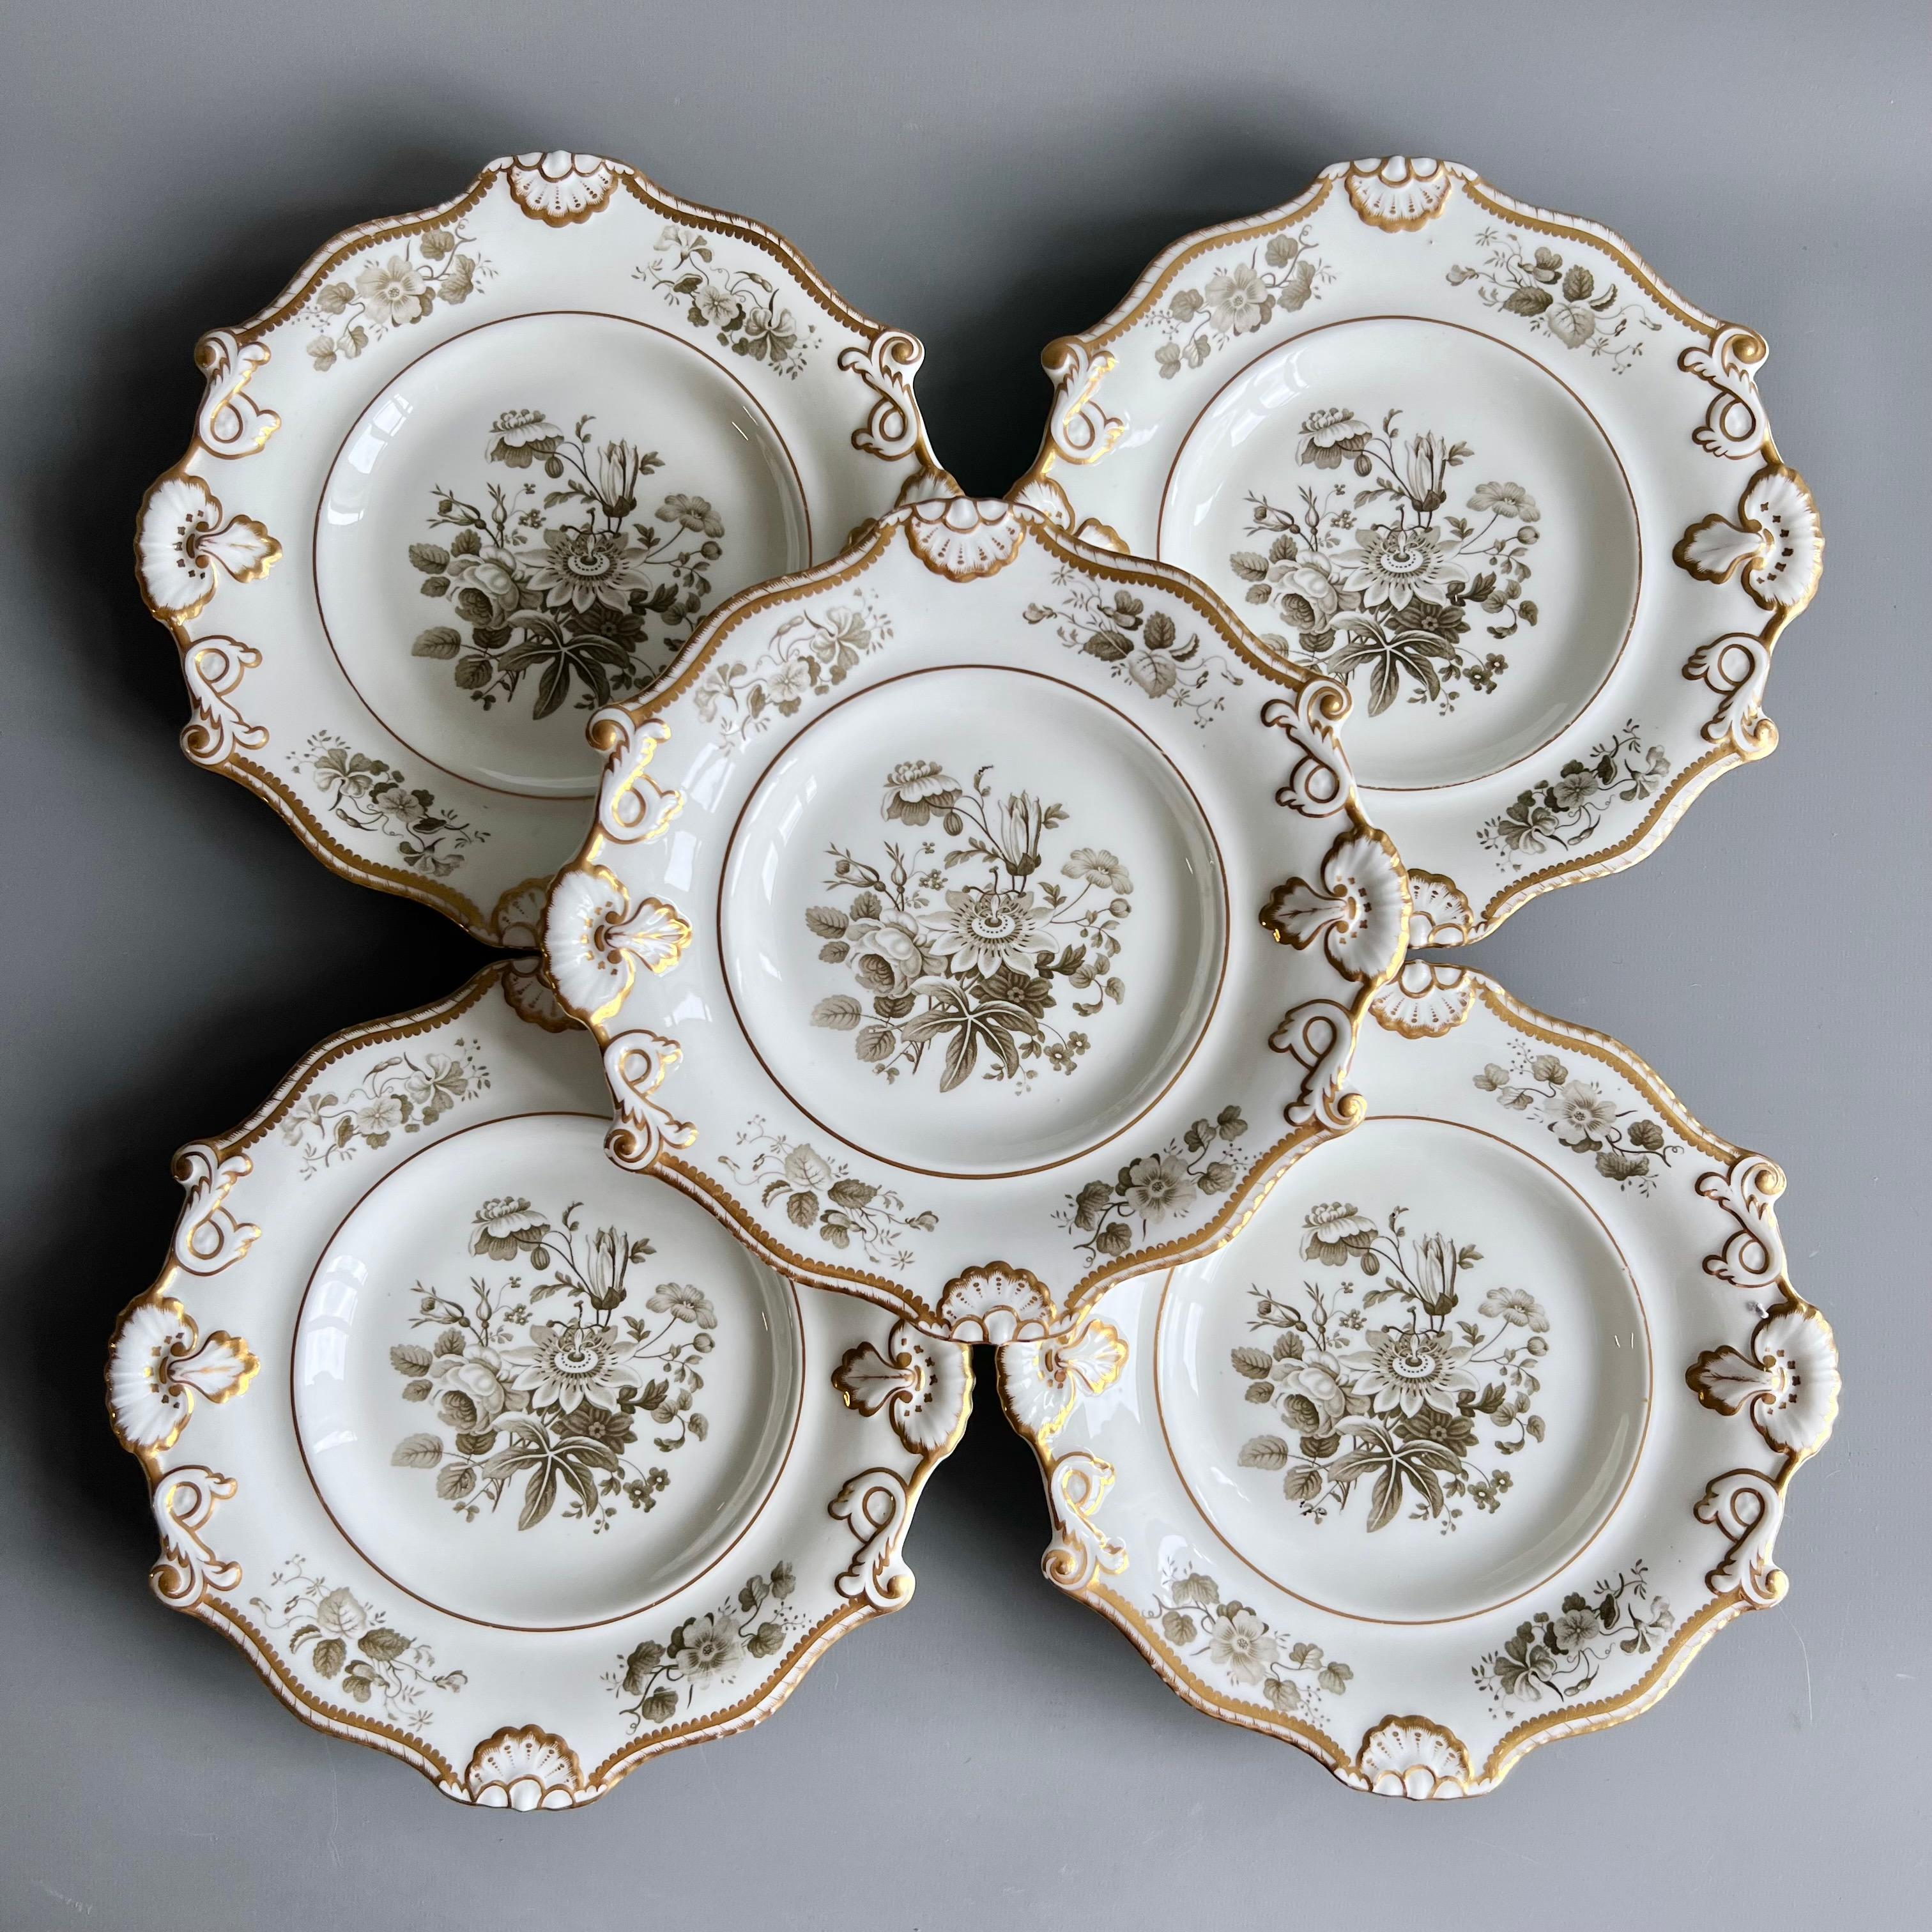 Minton Dessert Service, Inverted Shell White with Monochrome Flowers, ca 1830 In Good Condition For Sale In London, GB